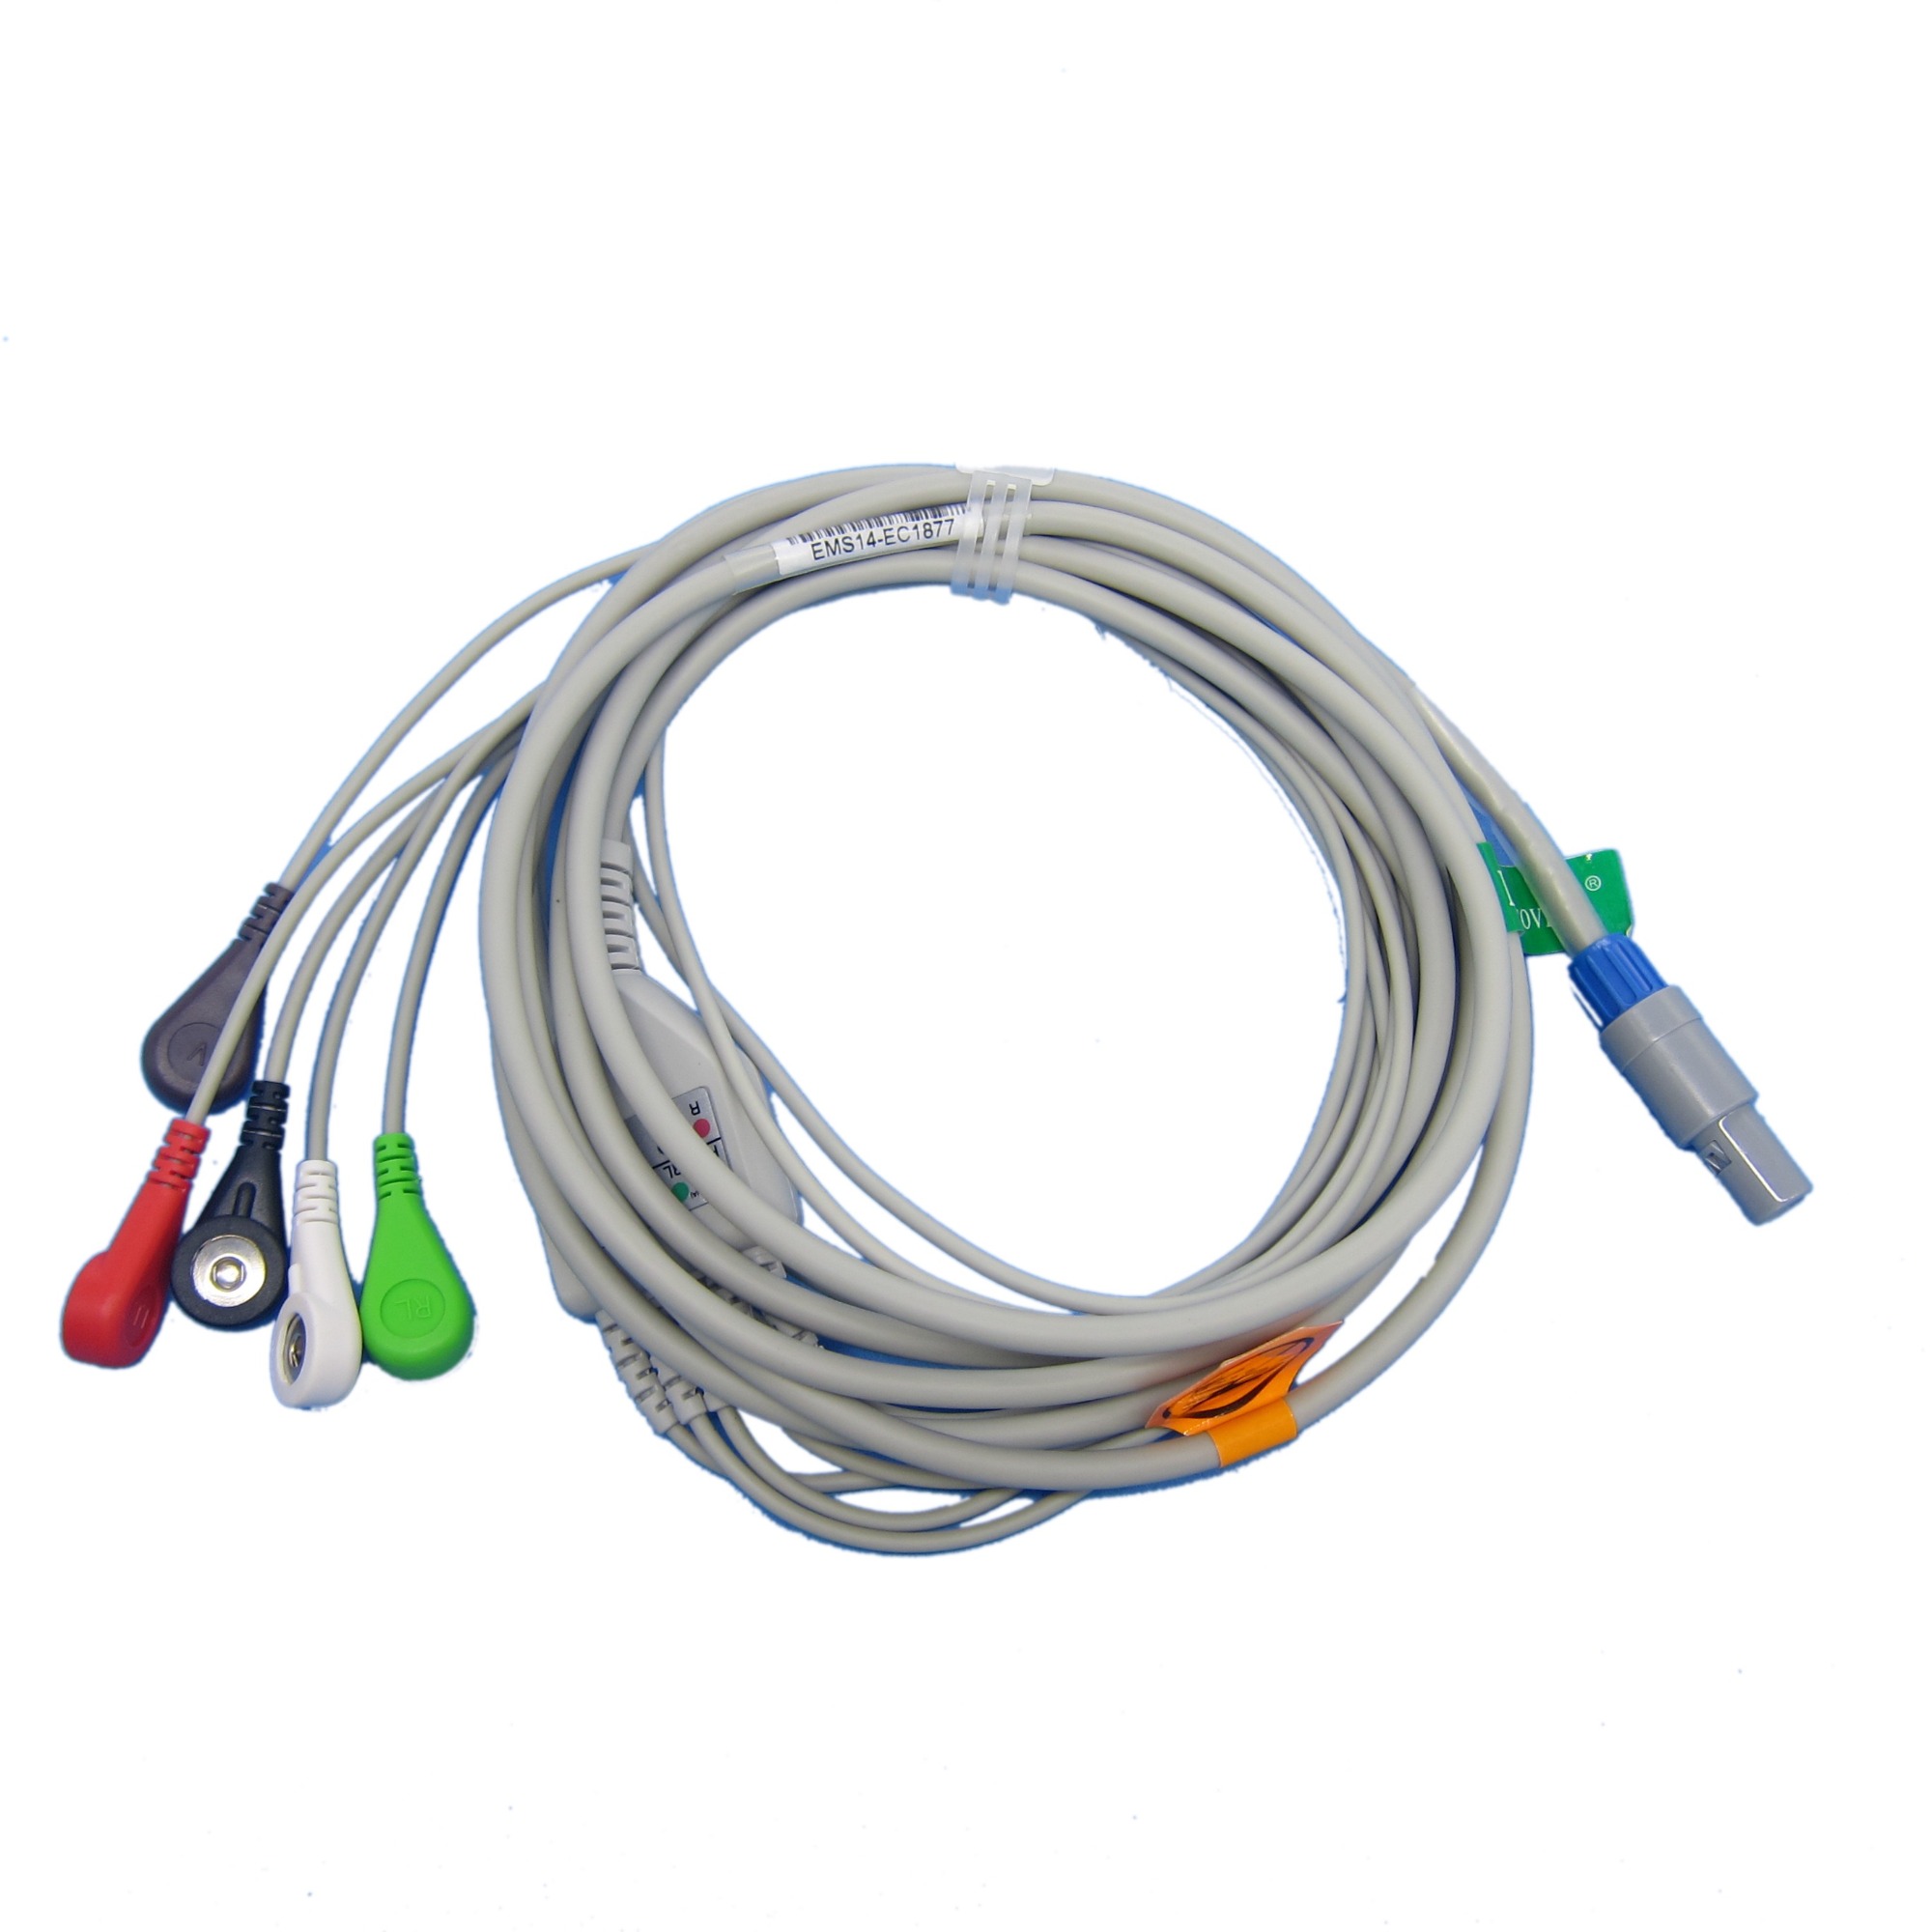 Hot sales One-piece 3 or 5 Leads Snap Or Clip ECG cable and leadwires for ECG MACHINE